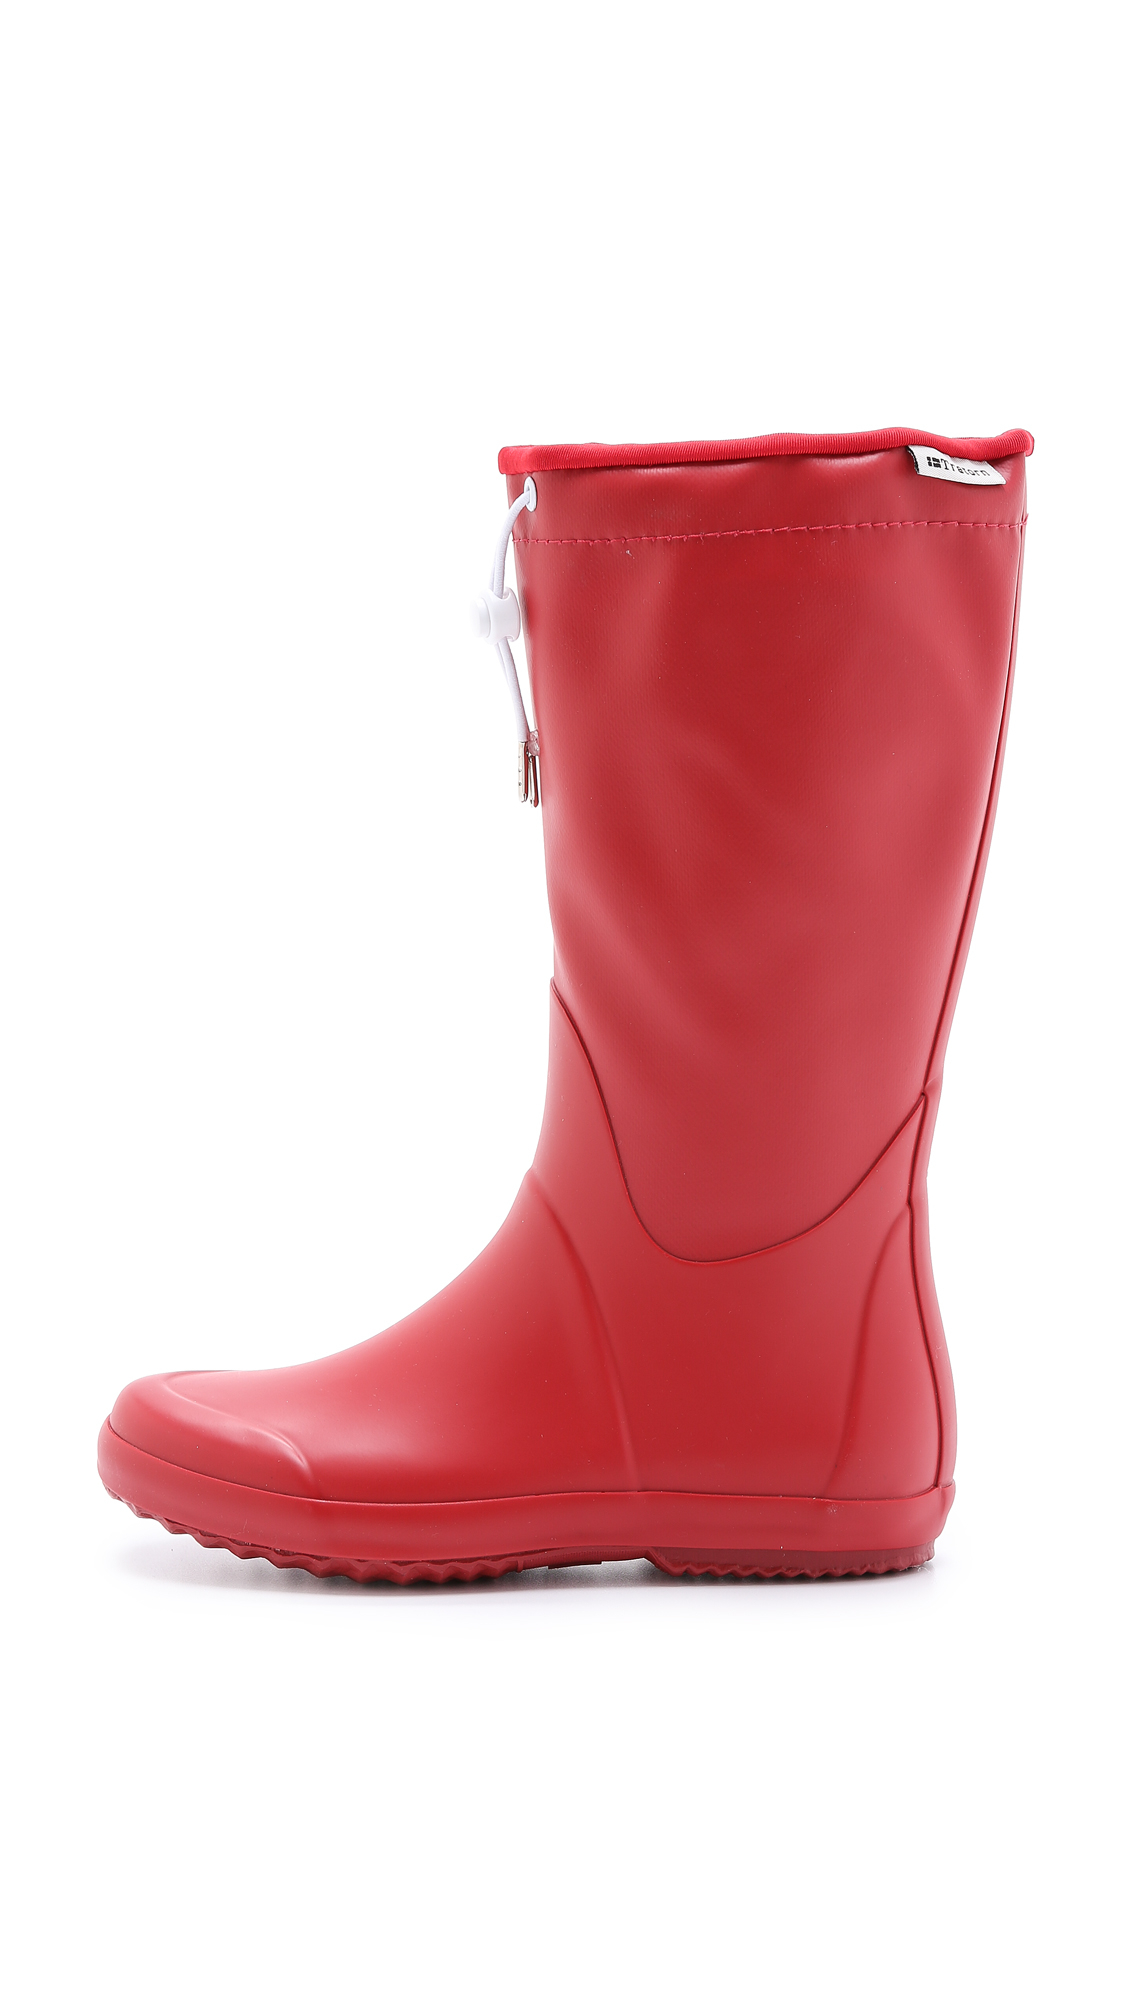 Tretorn Viken Toggle Rubber Boots - Red - Lyst